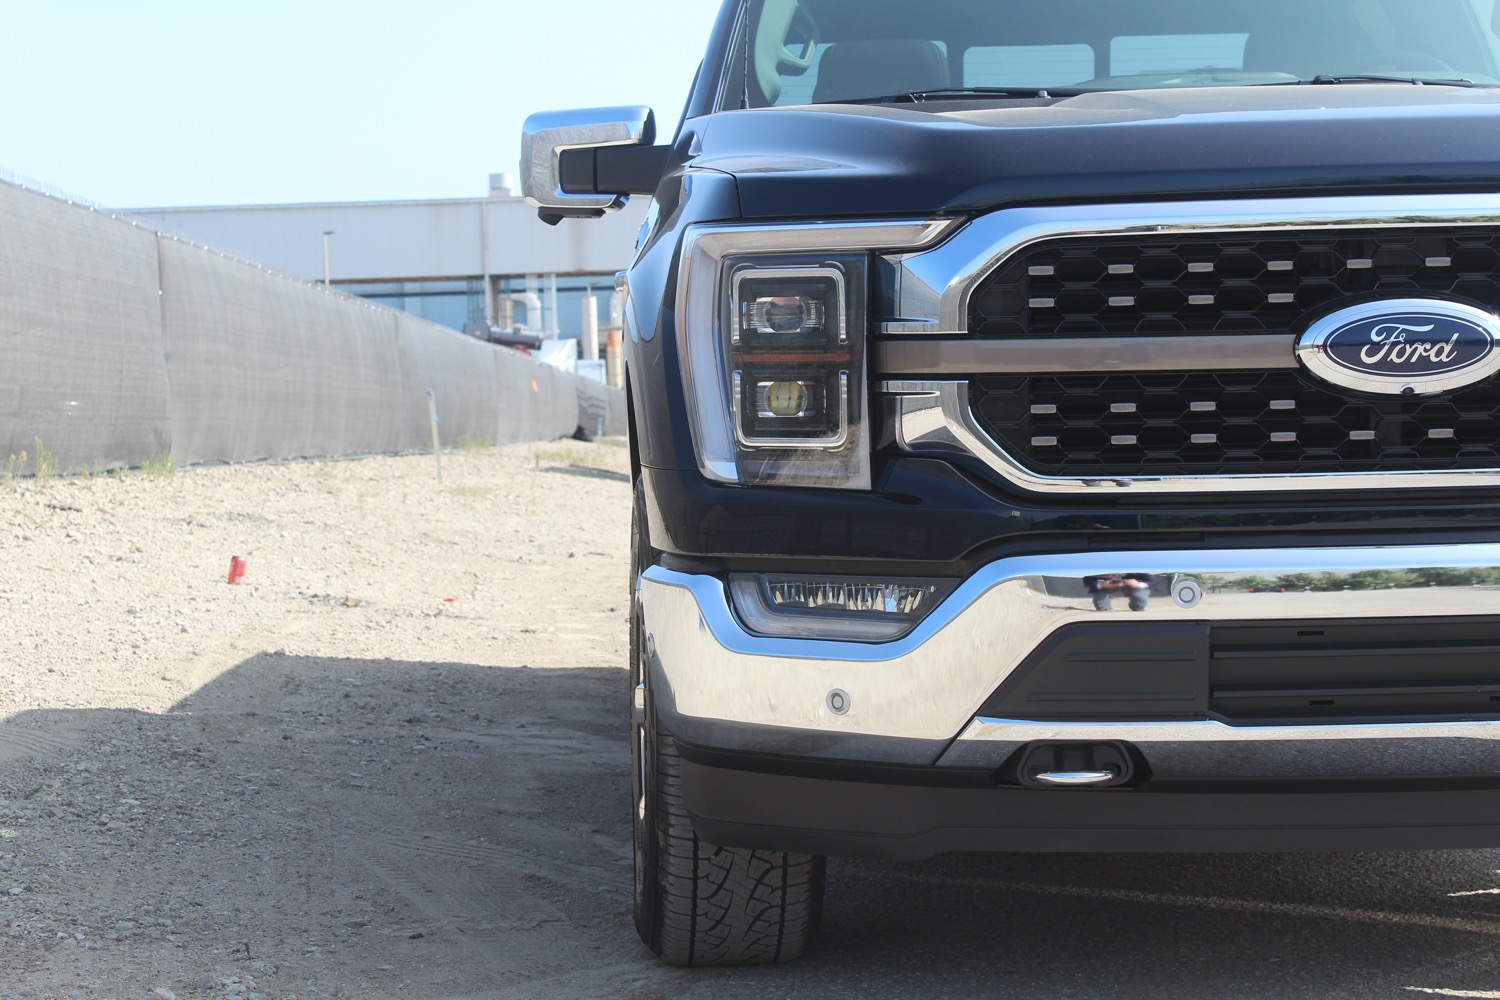 Ford Bronco Antimatter Blue real life look - on 2021 F-150 Antimatter Blue 2021 F-150 King Ranch Chrome 30